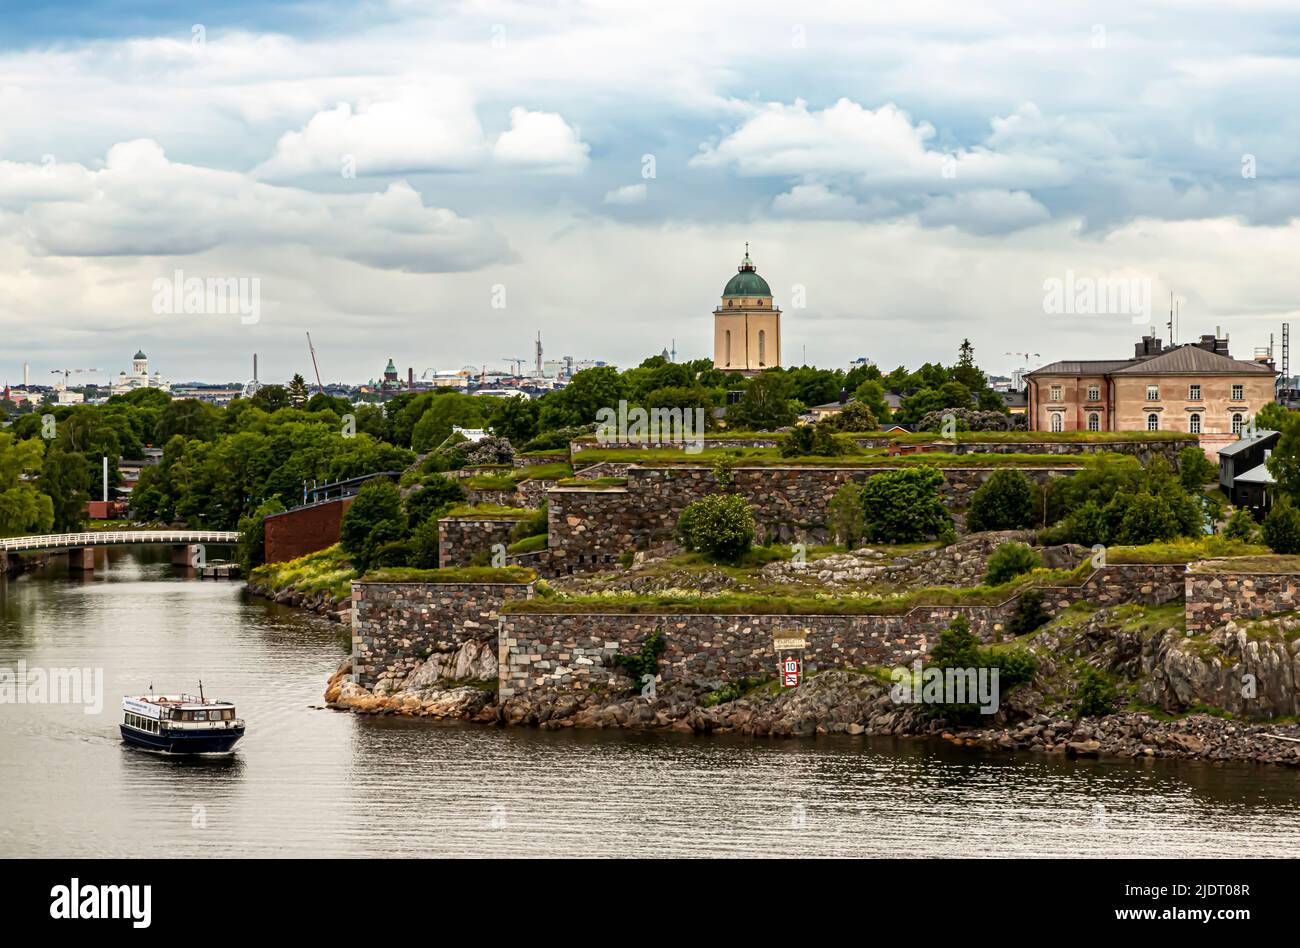 View of the Suomenlinna sea fortress. A ferry in the foreground. Downtown Helsinki in the background. Stock Photo